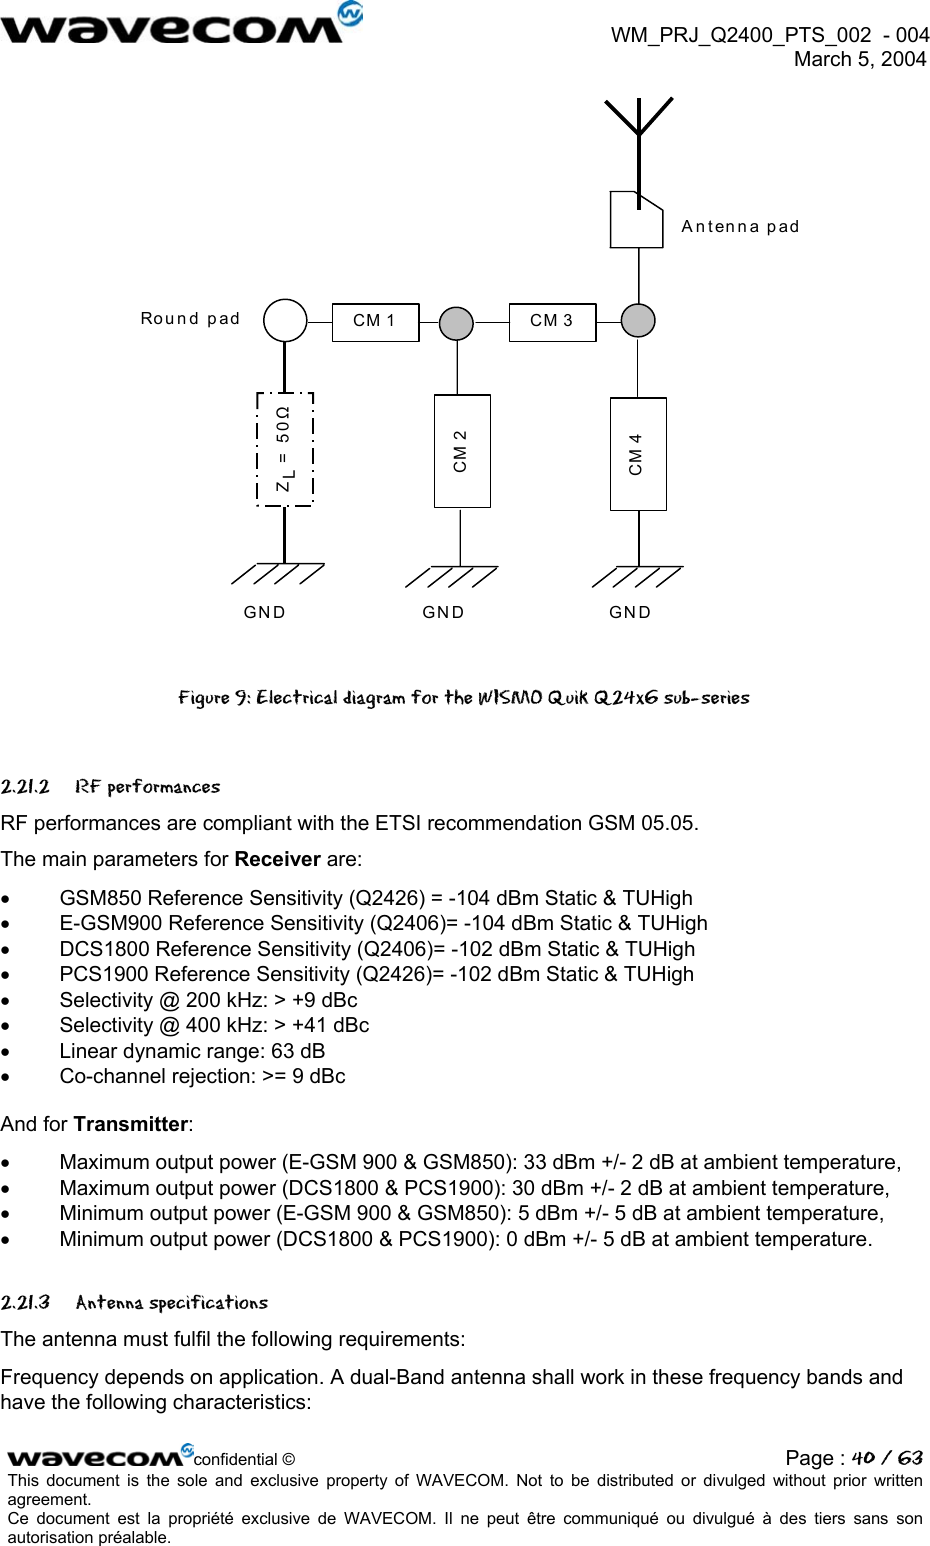  WM_PRJ_Q2400_PTS_002  - 004  March 5, 2004    Antenna pad GND GND GNDCM 1 CM 3Round padCM 2 CM 4 ZL = 50Ω   Figure 9: Electrical diagram for the WISMO Quik Q24x6 sub-series  2.21.2 RF performances RF performances are compliant with the ETSI recommendation GSM 05.05. The main parameters for Receiver are:  •  GSM850 Reference Sensitivity (Q2426) = -104 dBm Static &amp; TUHigh •  E-GSM900 Reference Sensitivity (Q2406)= -104 dBm Static &amp; TUHigh •  DCS1800 Reference Sensitivity (Q2406)= -102 dBm Static &amp; TUHigh •  PCS1900 Reference Sensitivity (Q2426)= -102 dBm Static &amp; TUHigh •  Selectivity @ 200 kHz: &gt; +9 dBc  •  Selectivity @ 400 kHz: &gt; +41 dBc •  Linear dynamic range: 63 dB •  Co-channel rejection: &gt;= 9 dBc  And for Transmitter: •  Maximum output power (E-GSM 900 &amp; GSM850): 33 dBm +/- 2 dB at ambient temperature, •  Maximum output power (DCS1800 &amp; PCS1900): 30 dBm +/- 2 dB at ambient temperature, •  Minimum output power (E-GSM 900 &amp; GSM850): 5 dBm +/- 5 dB at ambient temperature, •  Minimum output power (DCS1800 &amp; PCS1900): 0 dBm +/- 5 dB at ambient temperature. 2.21.3 Antenna specifications The antenna must fulfil the following requirements: Frequency depends on application. A dual-Band antenna shall work in these frequency bands and have the following characteristics: confidential © Page : 40 / 63This document is the sole and exclusive property of WAVECOM. Not to be distributed or divulged without prior written agreement.  Ce document est la propriété exclusive de WAVECOM. Il ne peut être communiqué ou divulgué à des tiers sans son autorisation préalable.  